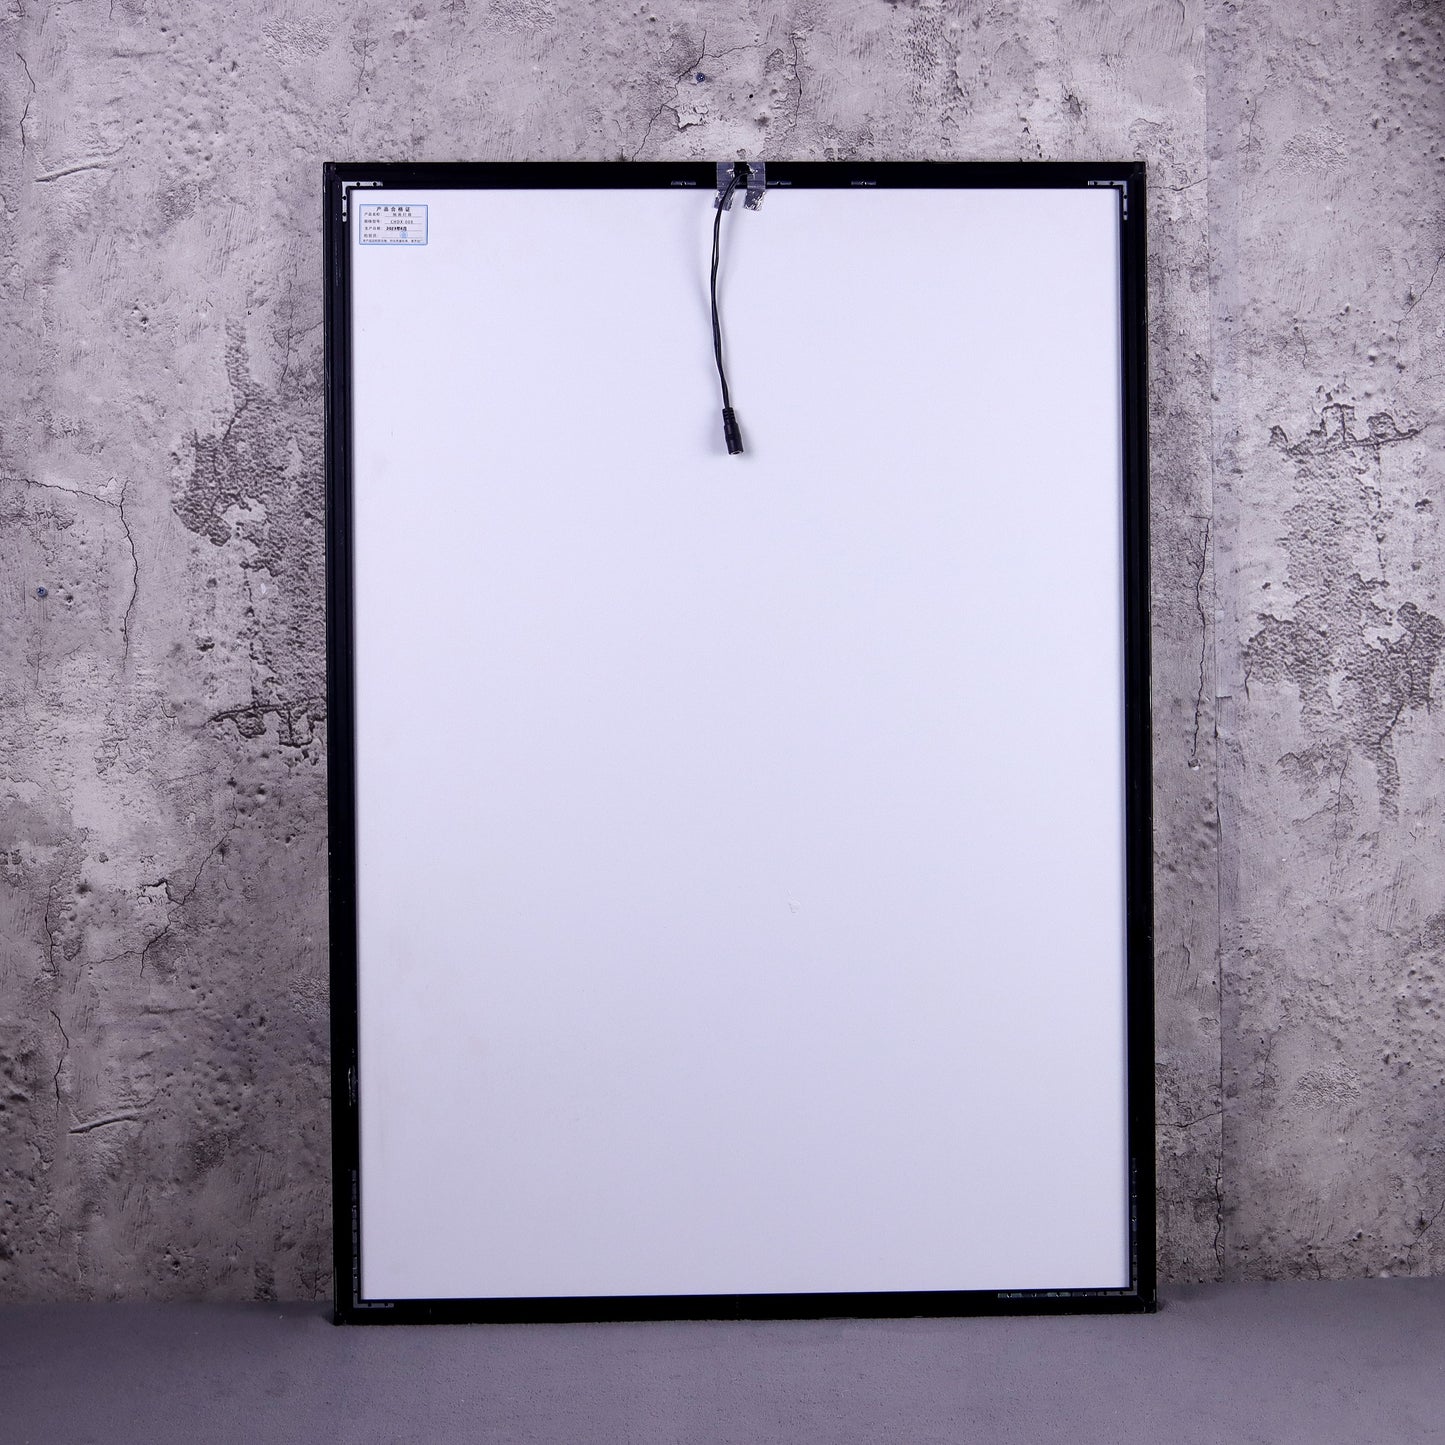 Ultra-Thin LED Light Box Sign for Business Advertising Use